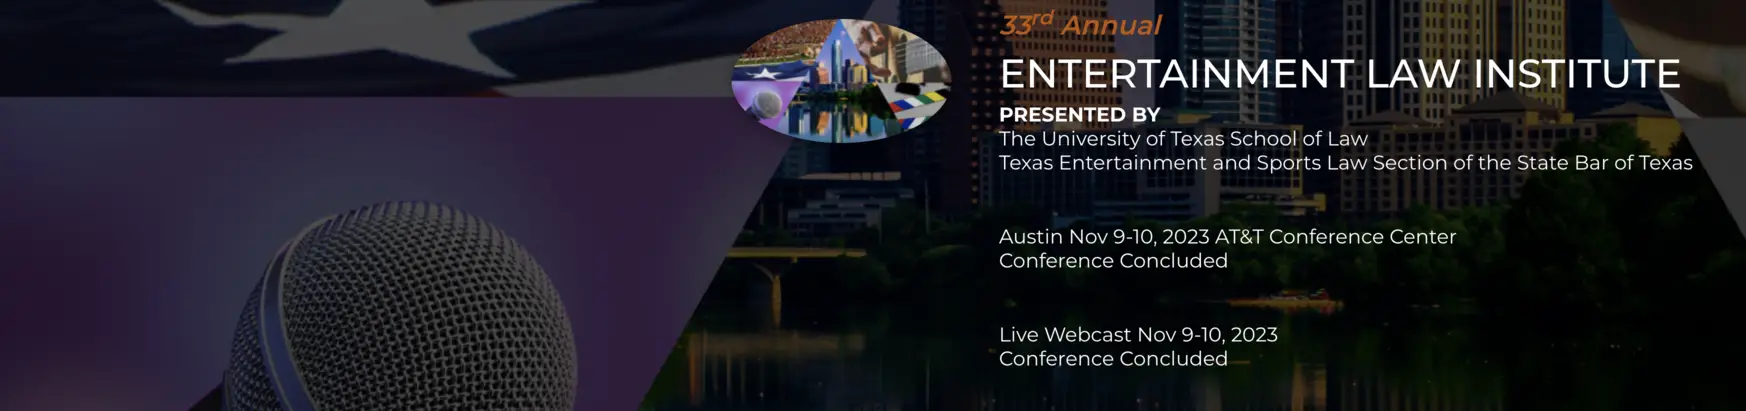 Jeremy Evans speaks at 33rd Annual Entertainment Law Institute in Austin, Texas